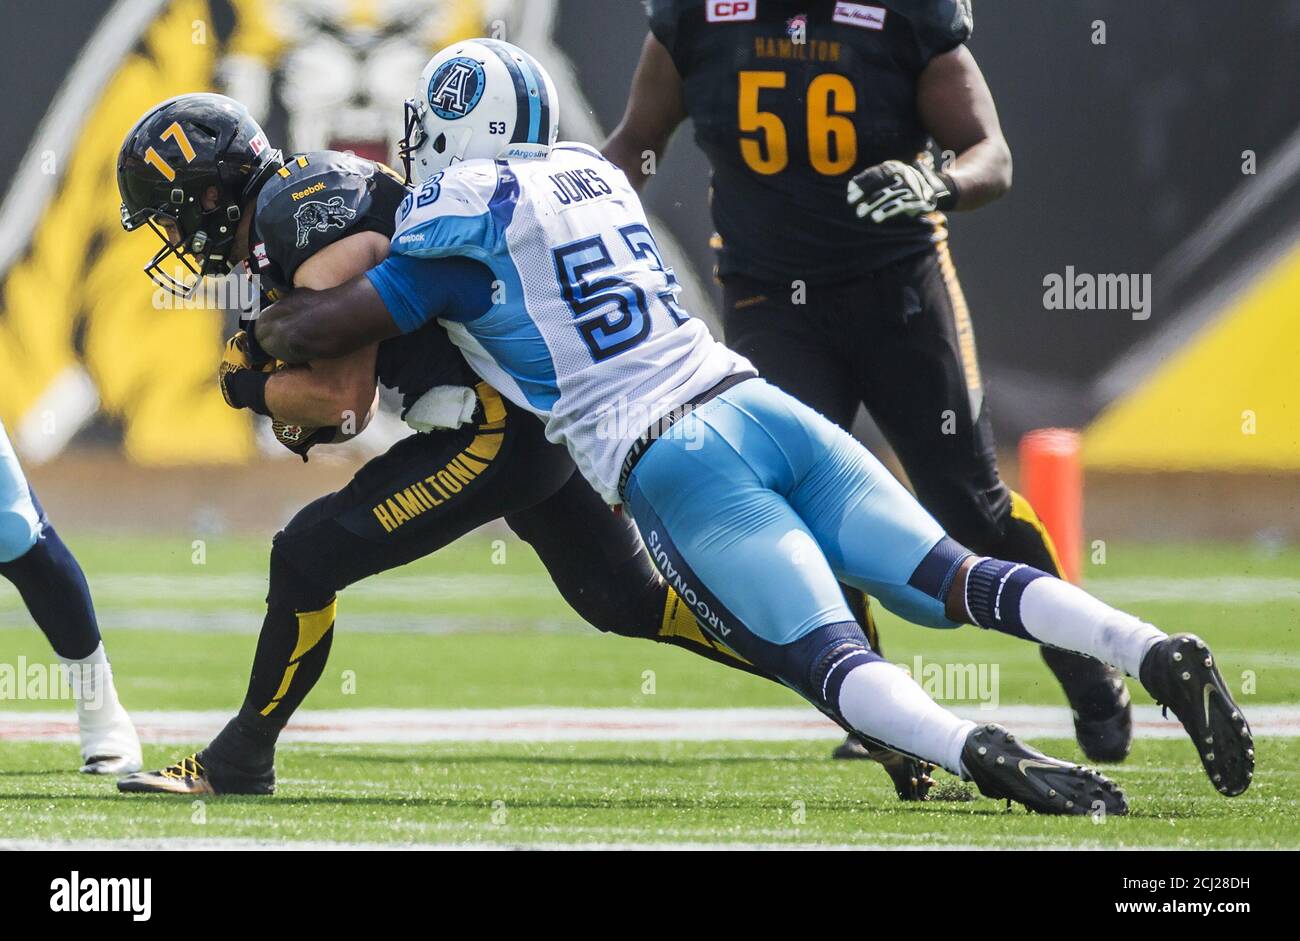 Hamilton Tiger-Cats' Luke Tasker (L) runs as he is tackled by Toronto  Argonauts' Gregory Jones (R) during the first half of their CFL football  game in Hamilton, Ontario, Canada, September 7, 2015.